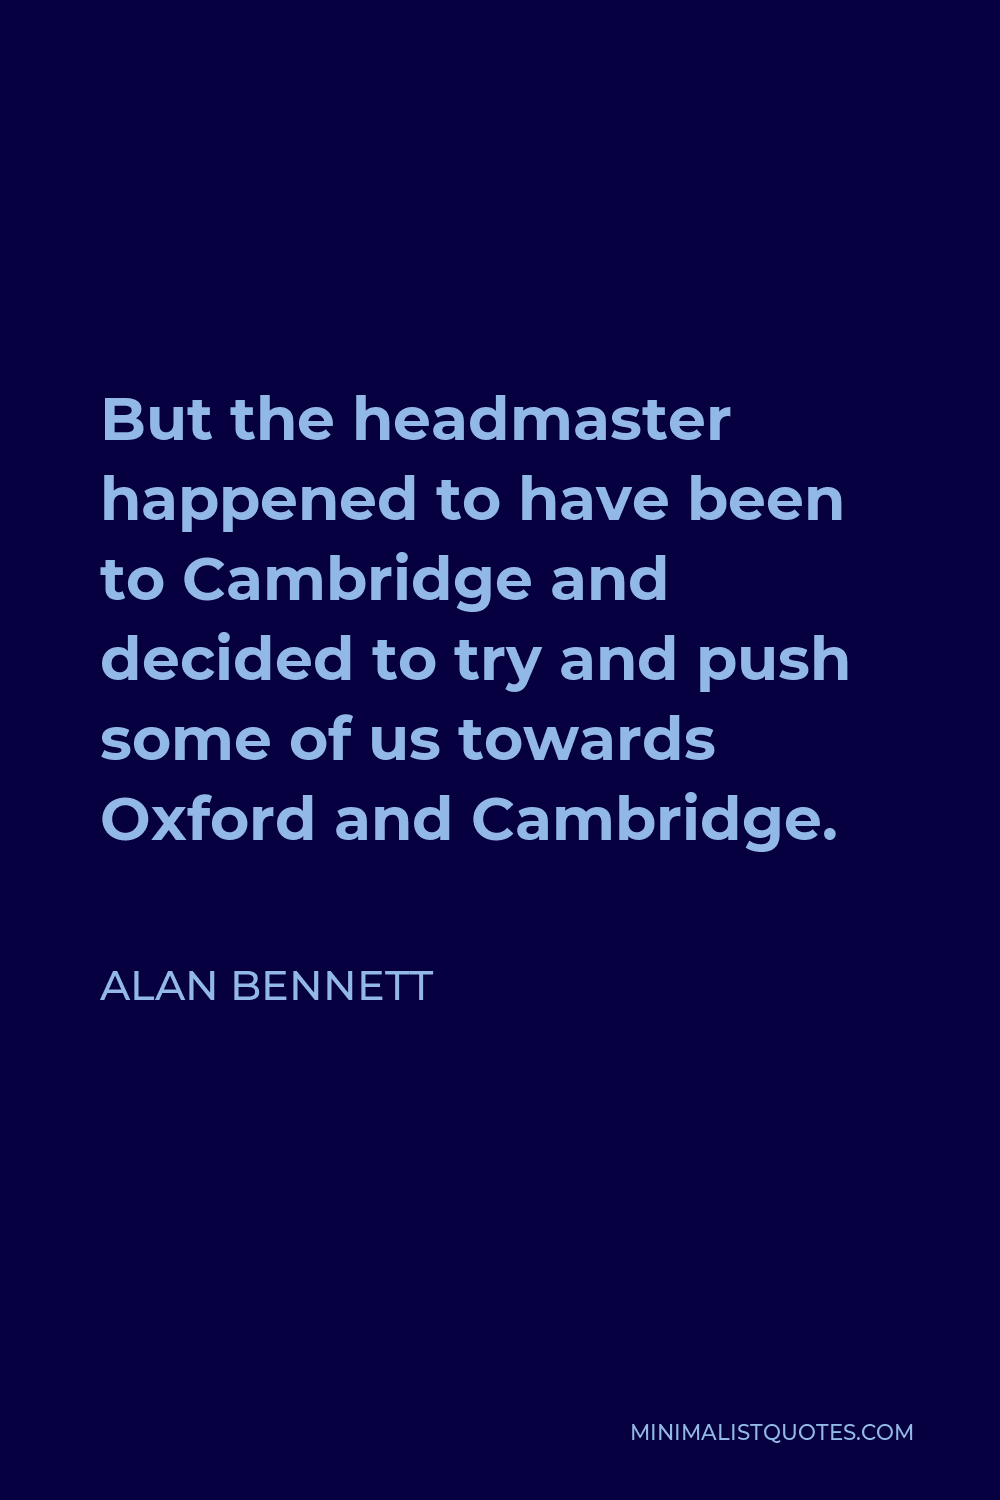 Alan Bennett Quote - But the headmaster happened to have been to Cambridge and decided to try and push some of us towards Oxford and Cambridge.